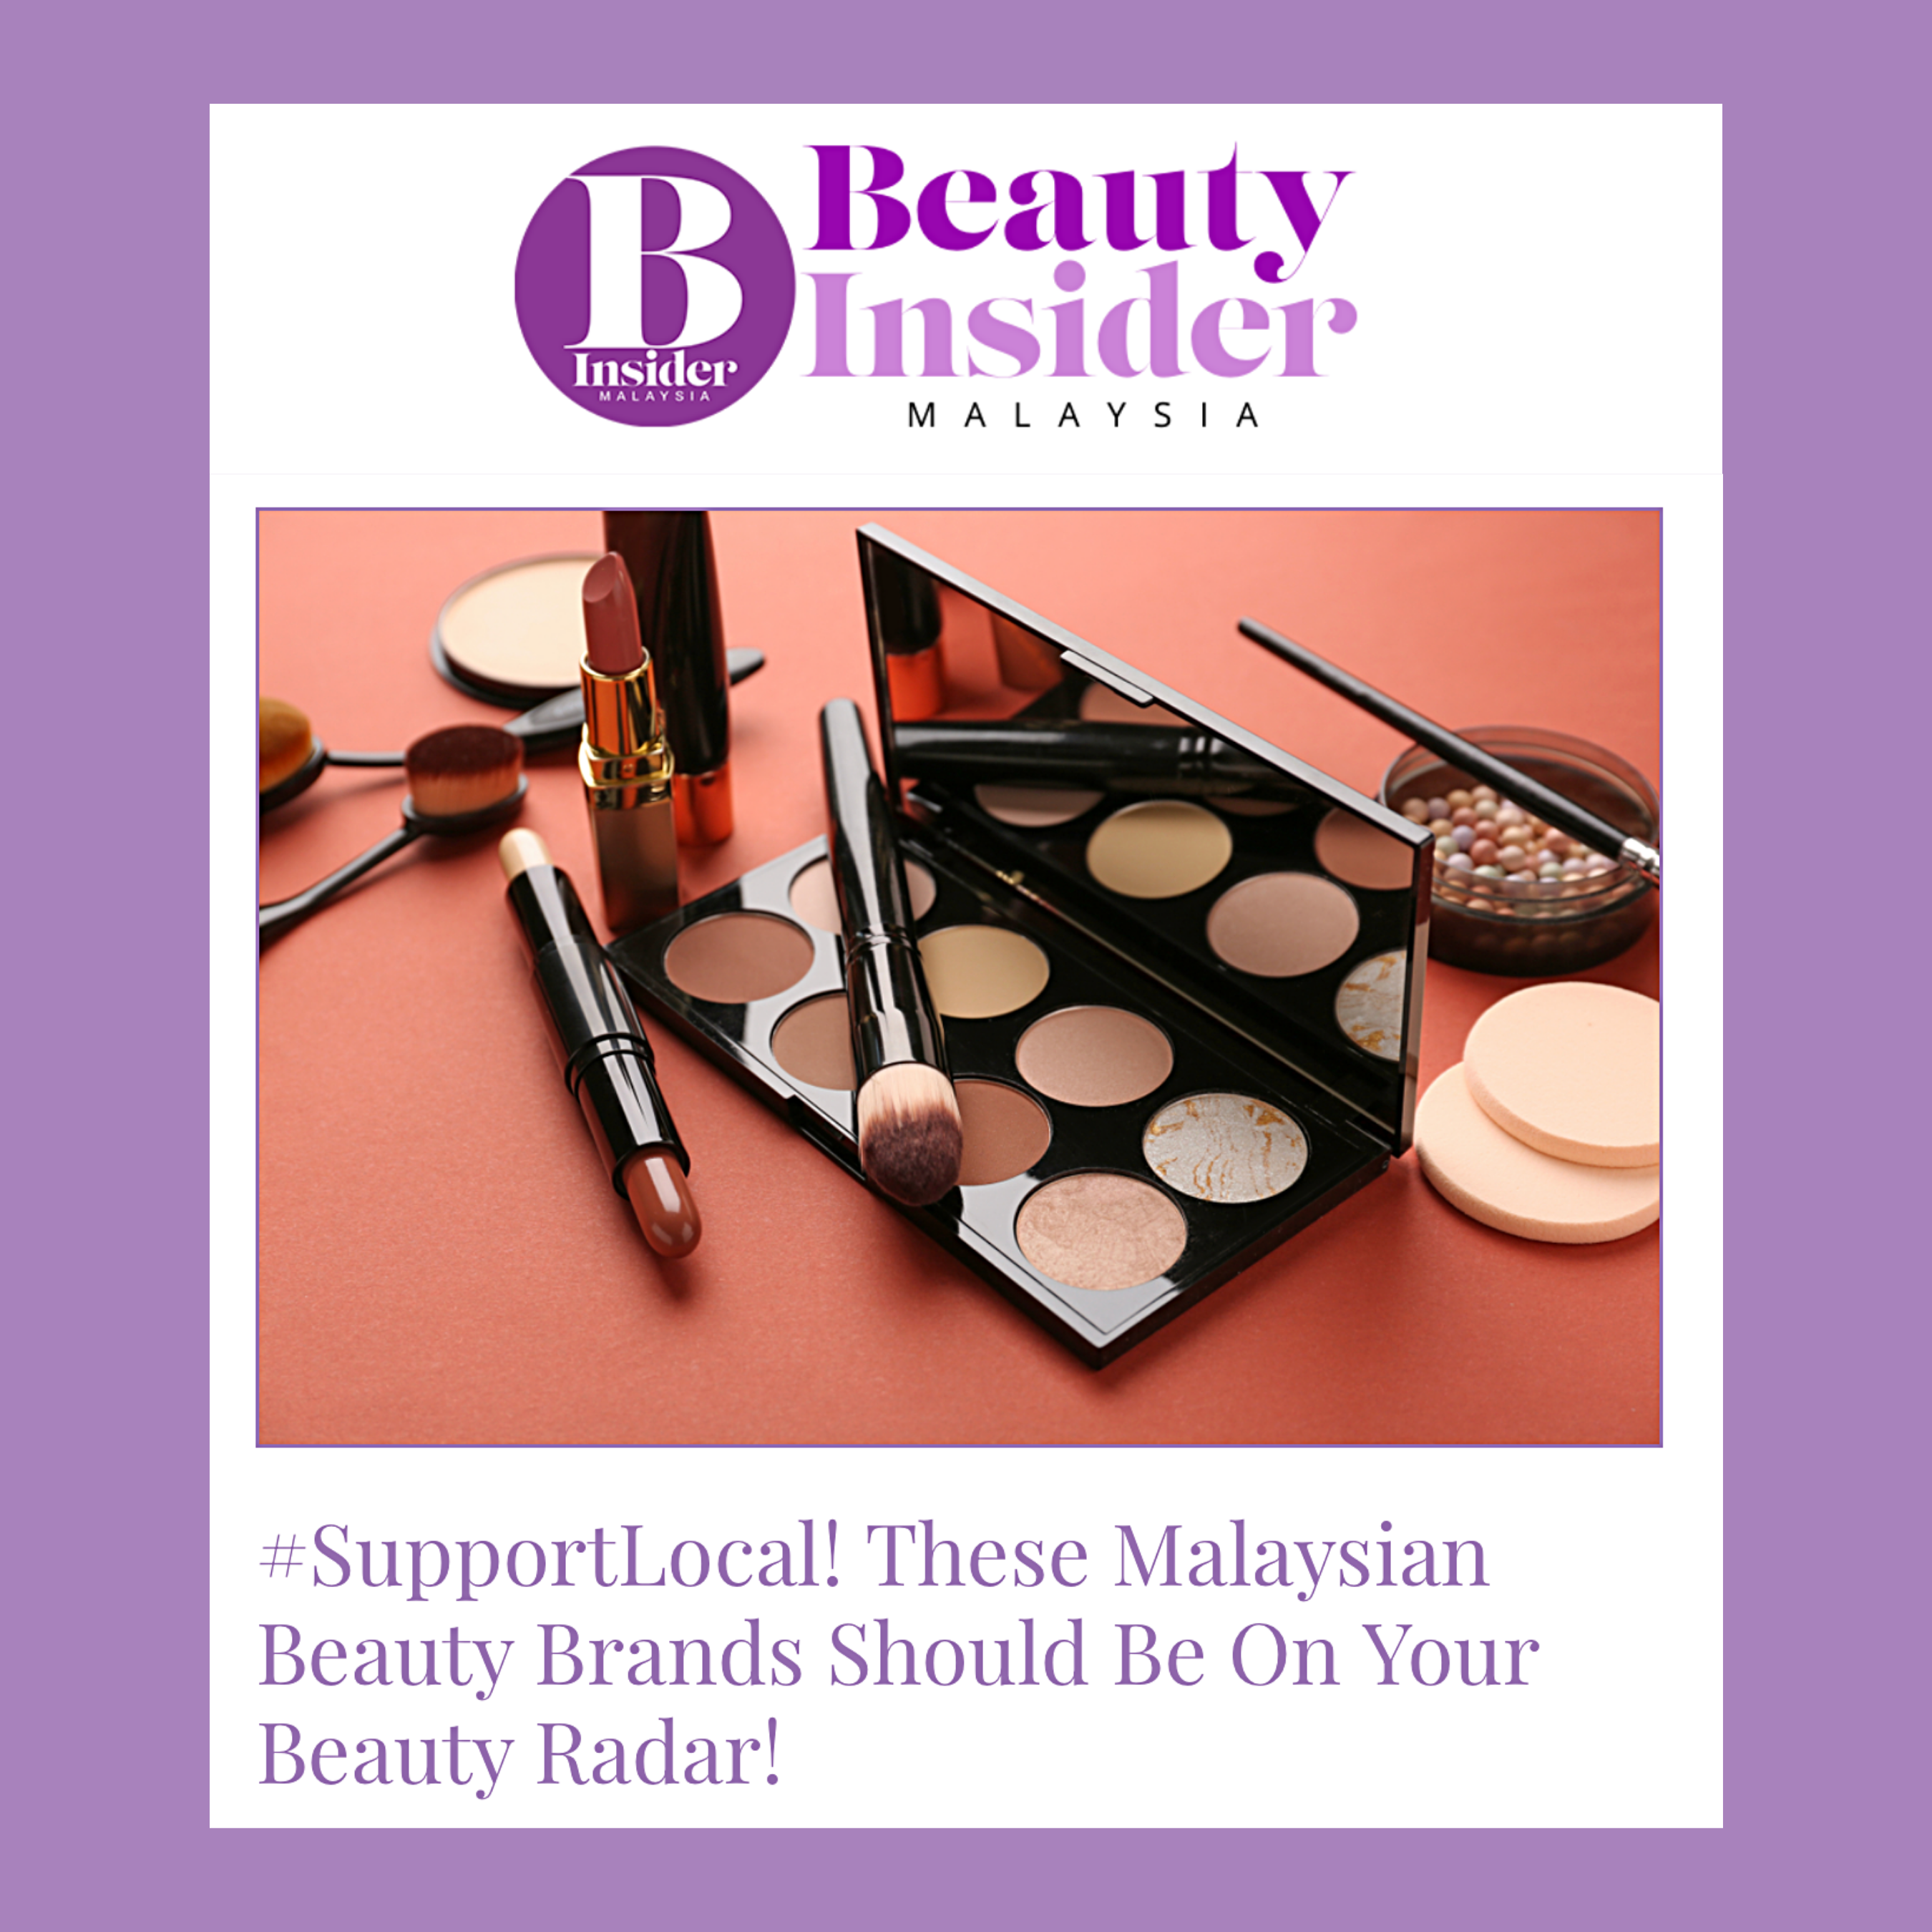 These Malaysian Beauty Brands Should Be On Your Beauty Radar!